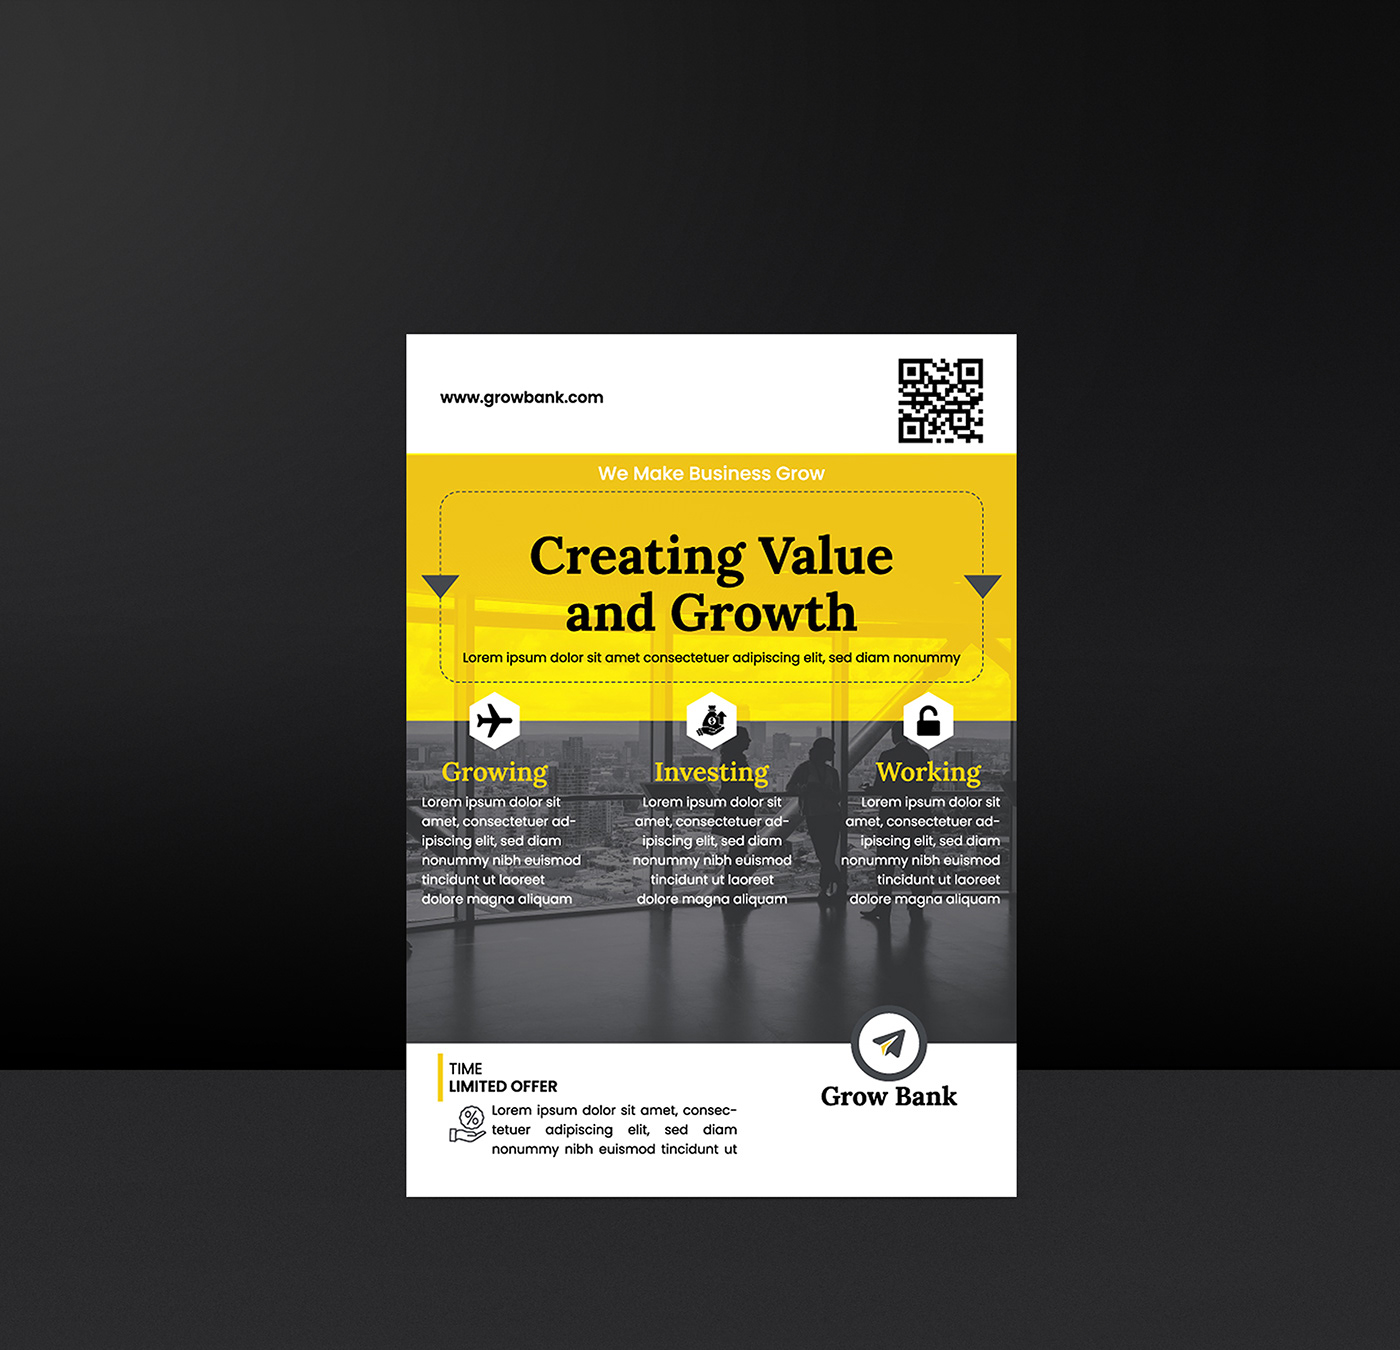 Corporate Flyer Design for Stock Market Place, The Flyer Size kept 8.27×11.69 inches.